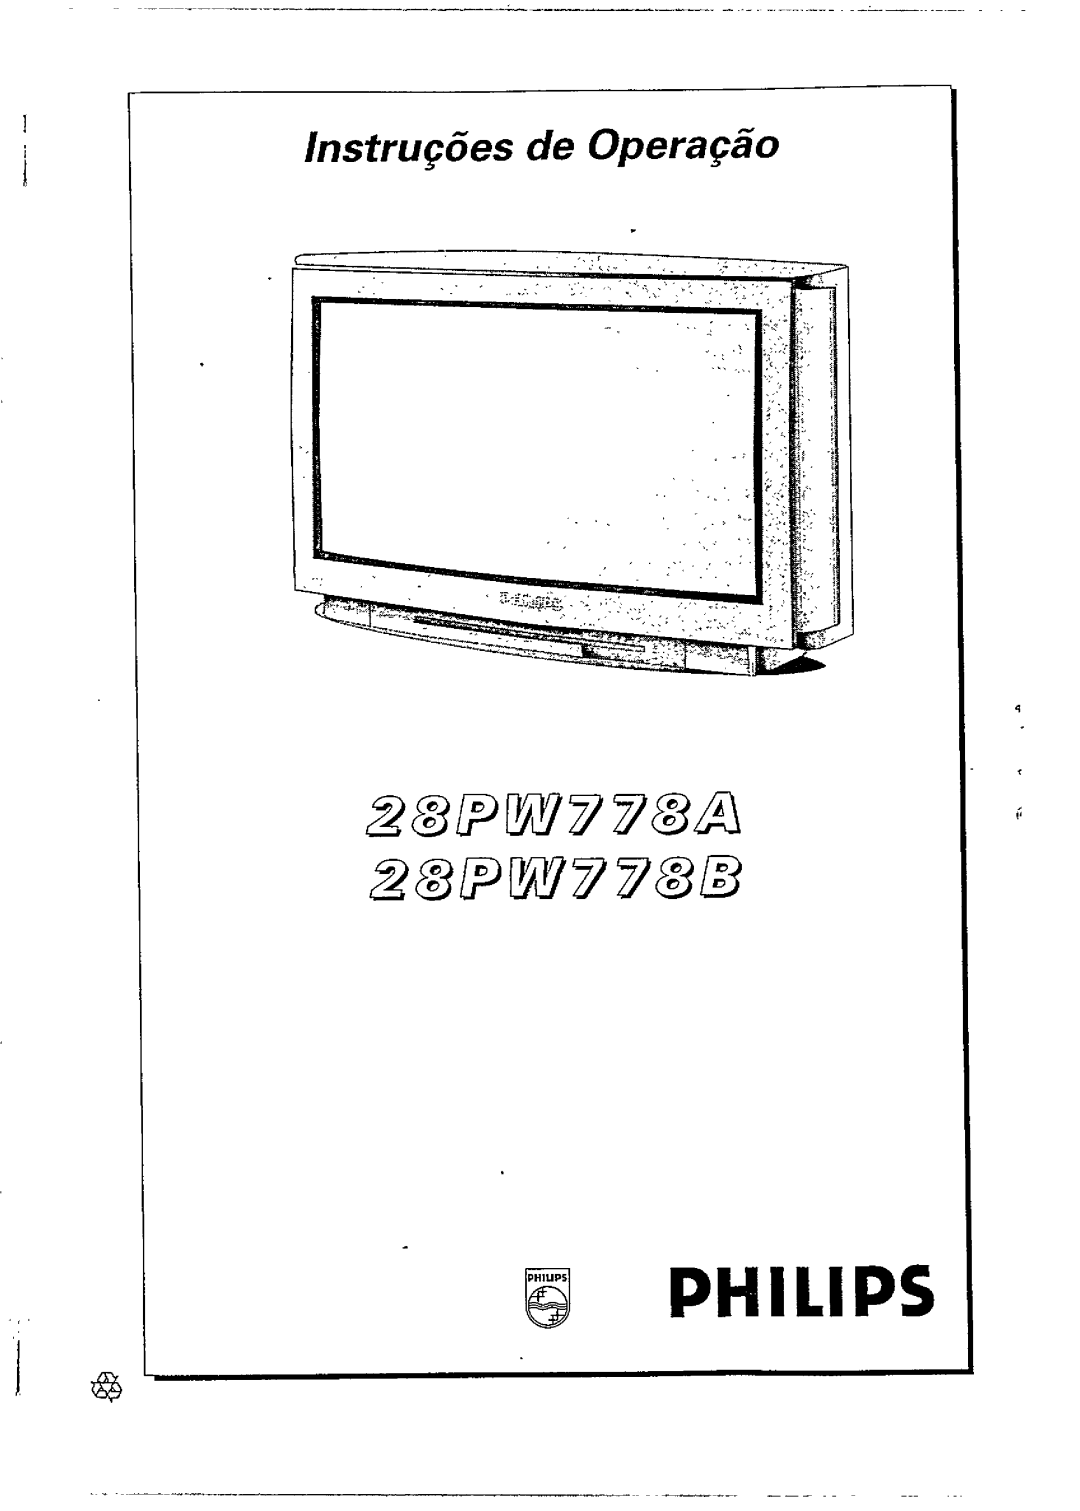 Philips 28PW778A, 28PW778B manual 